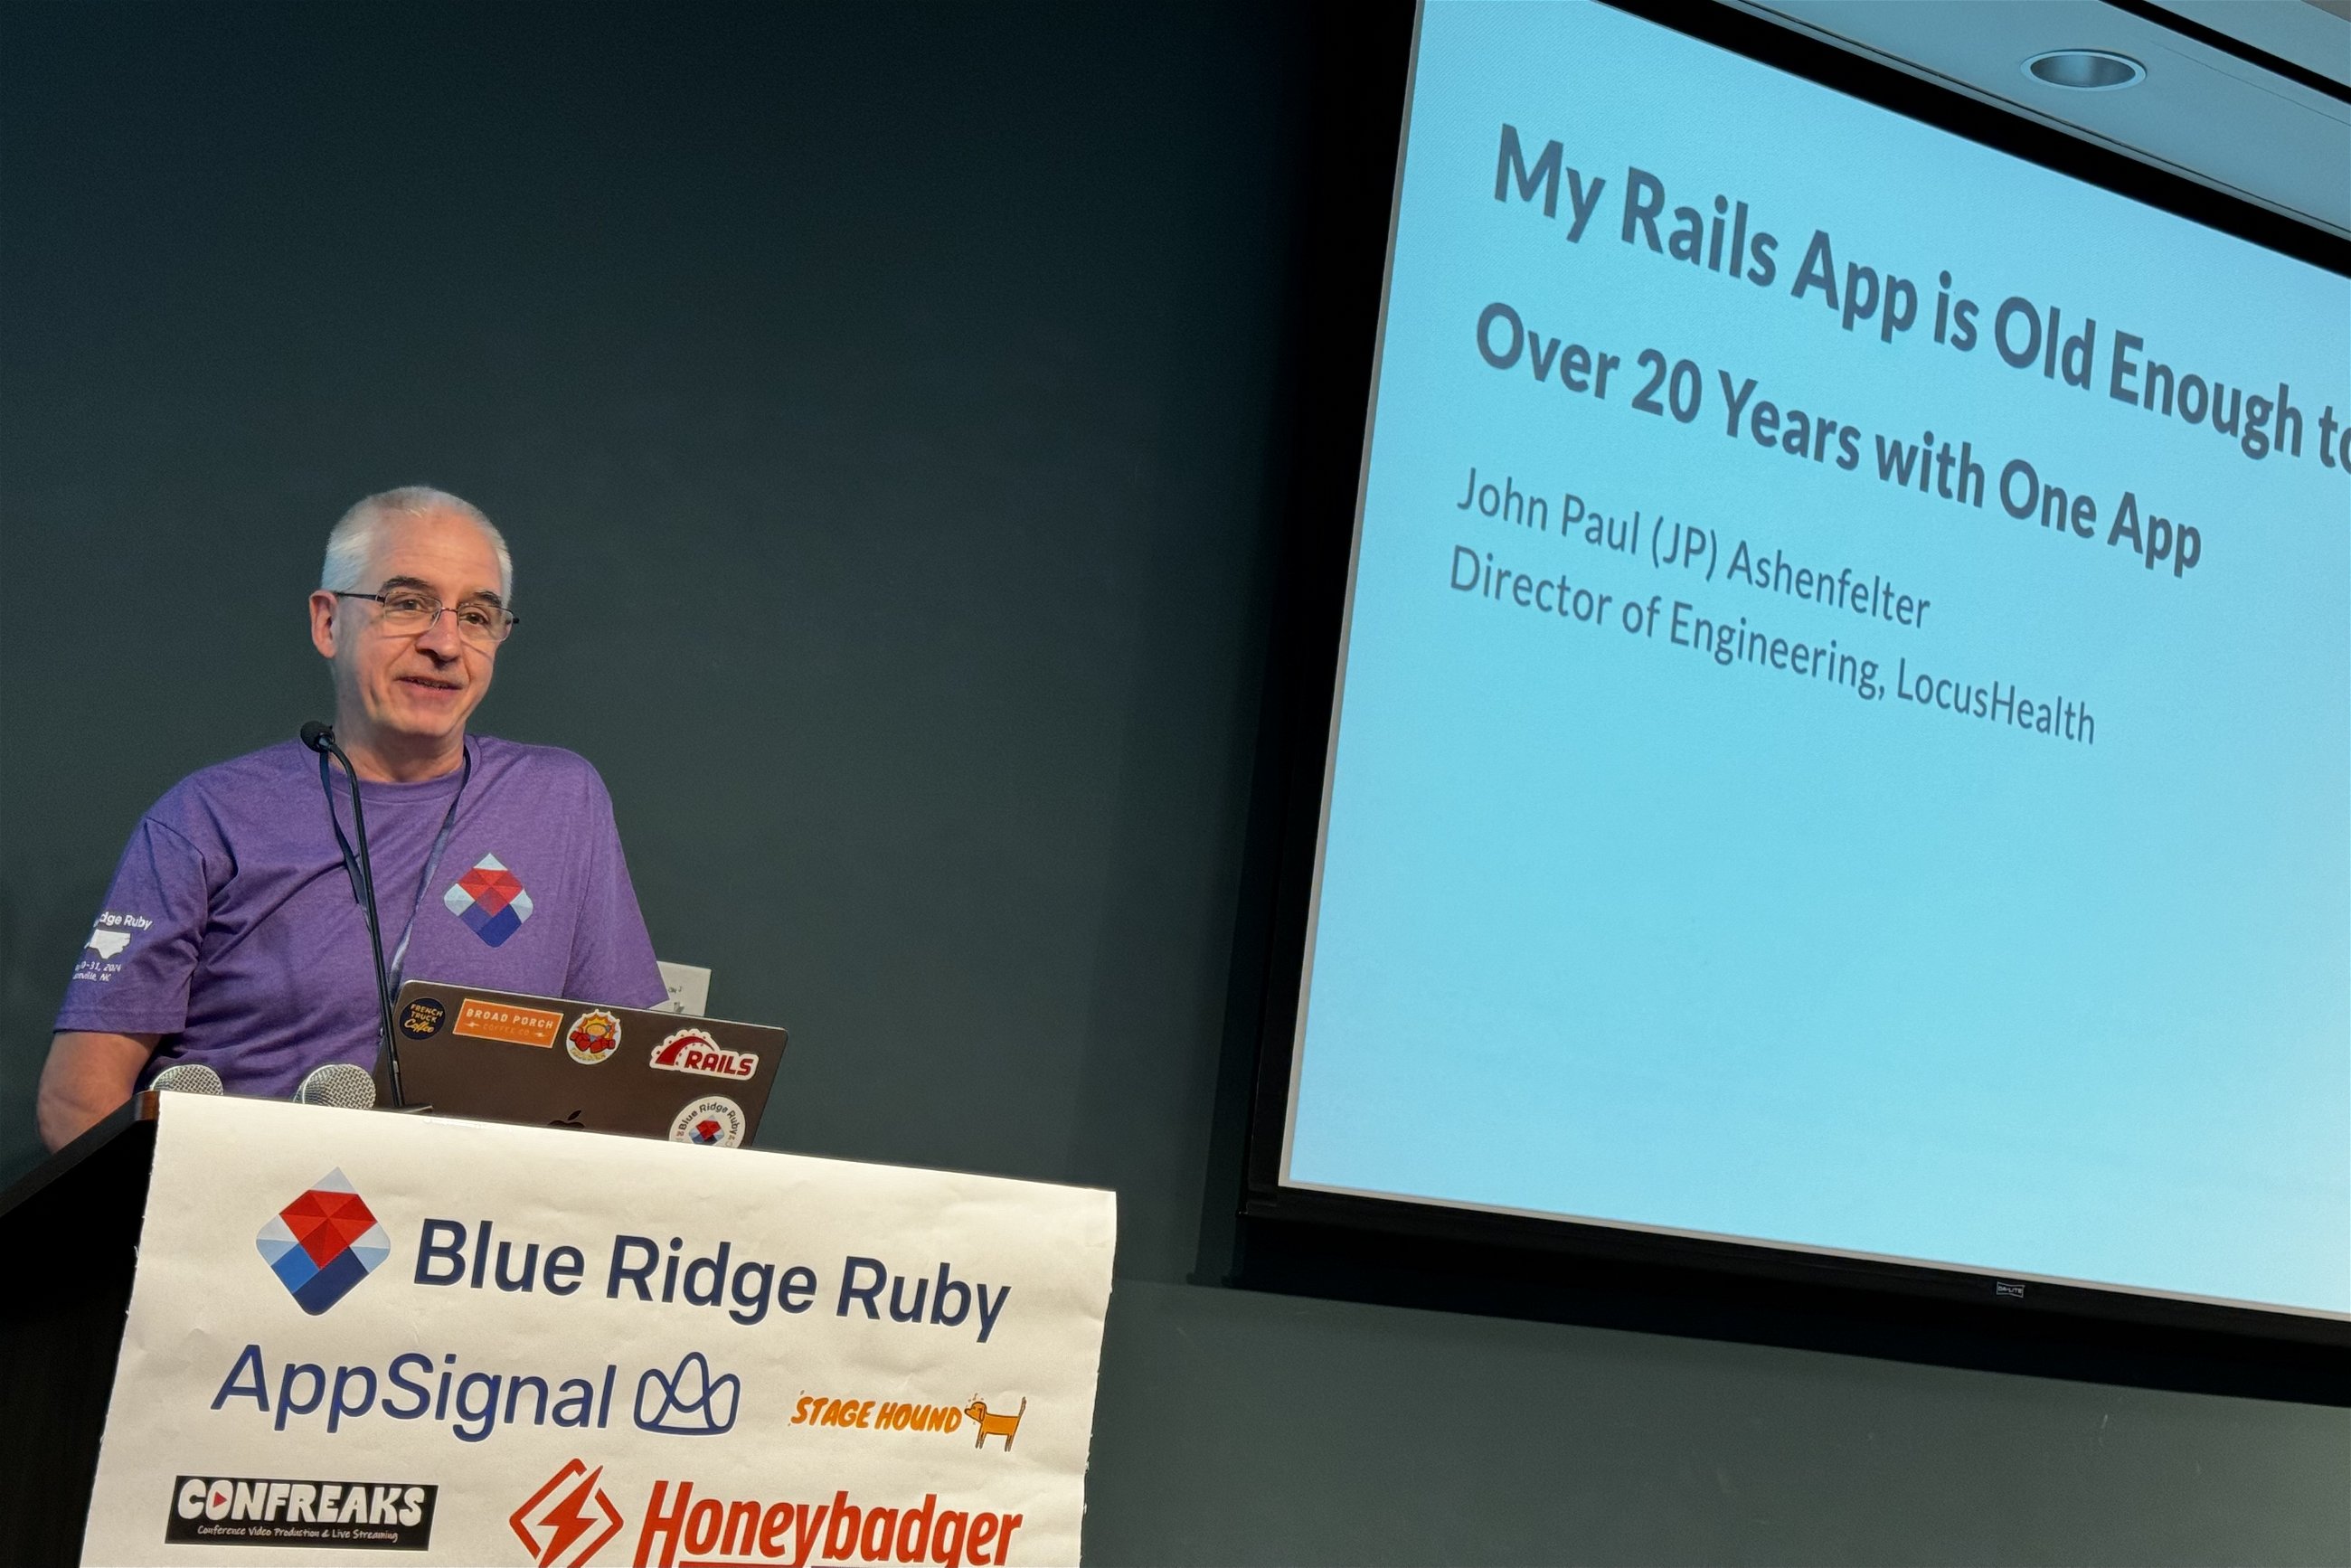 John Paul Ashenfelter at Blue Ridge Ruby conference discussing his long-term experience with a Rails application, titled "My Rails App is Old Enough to Drink: Over 20 Years with One App."